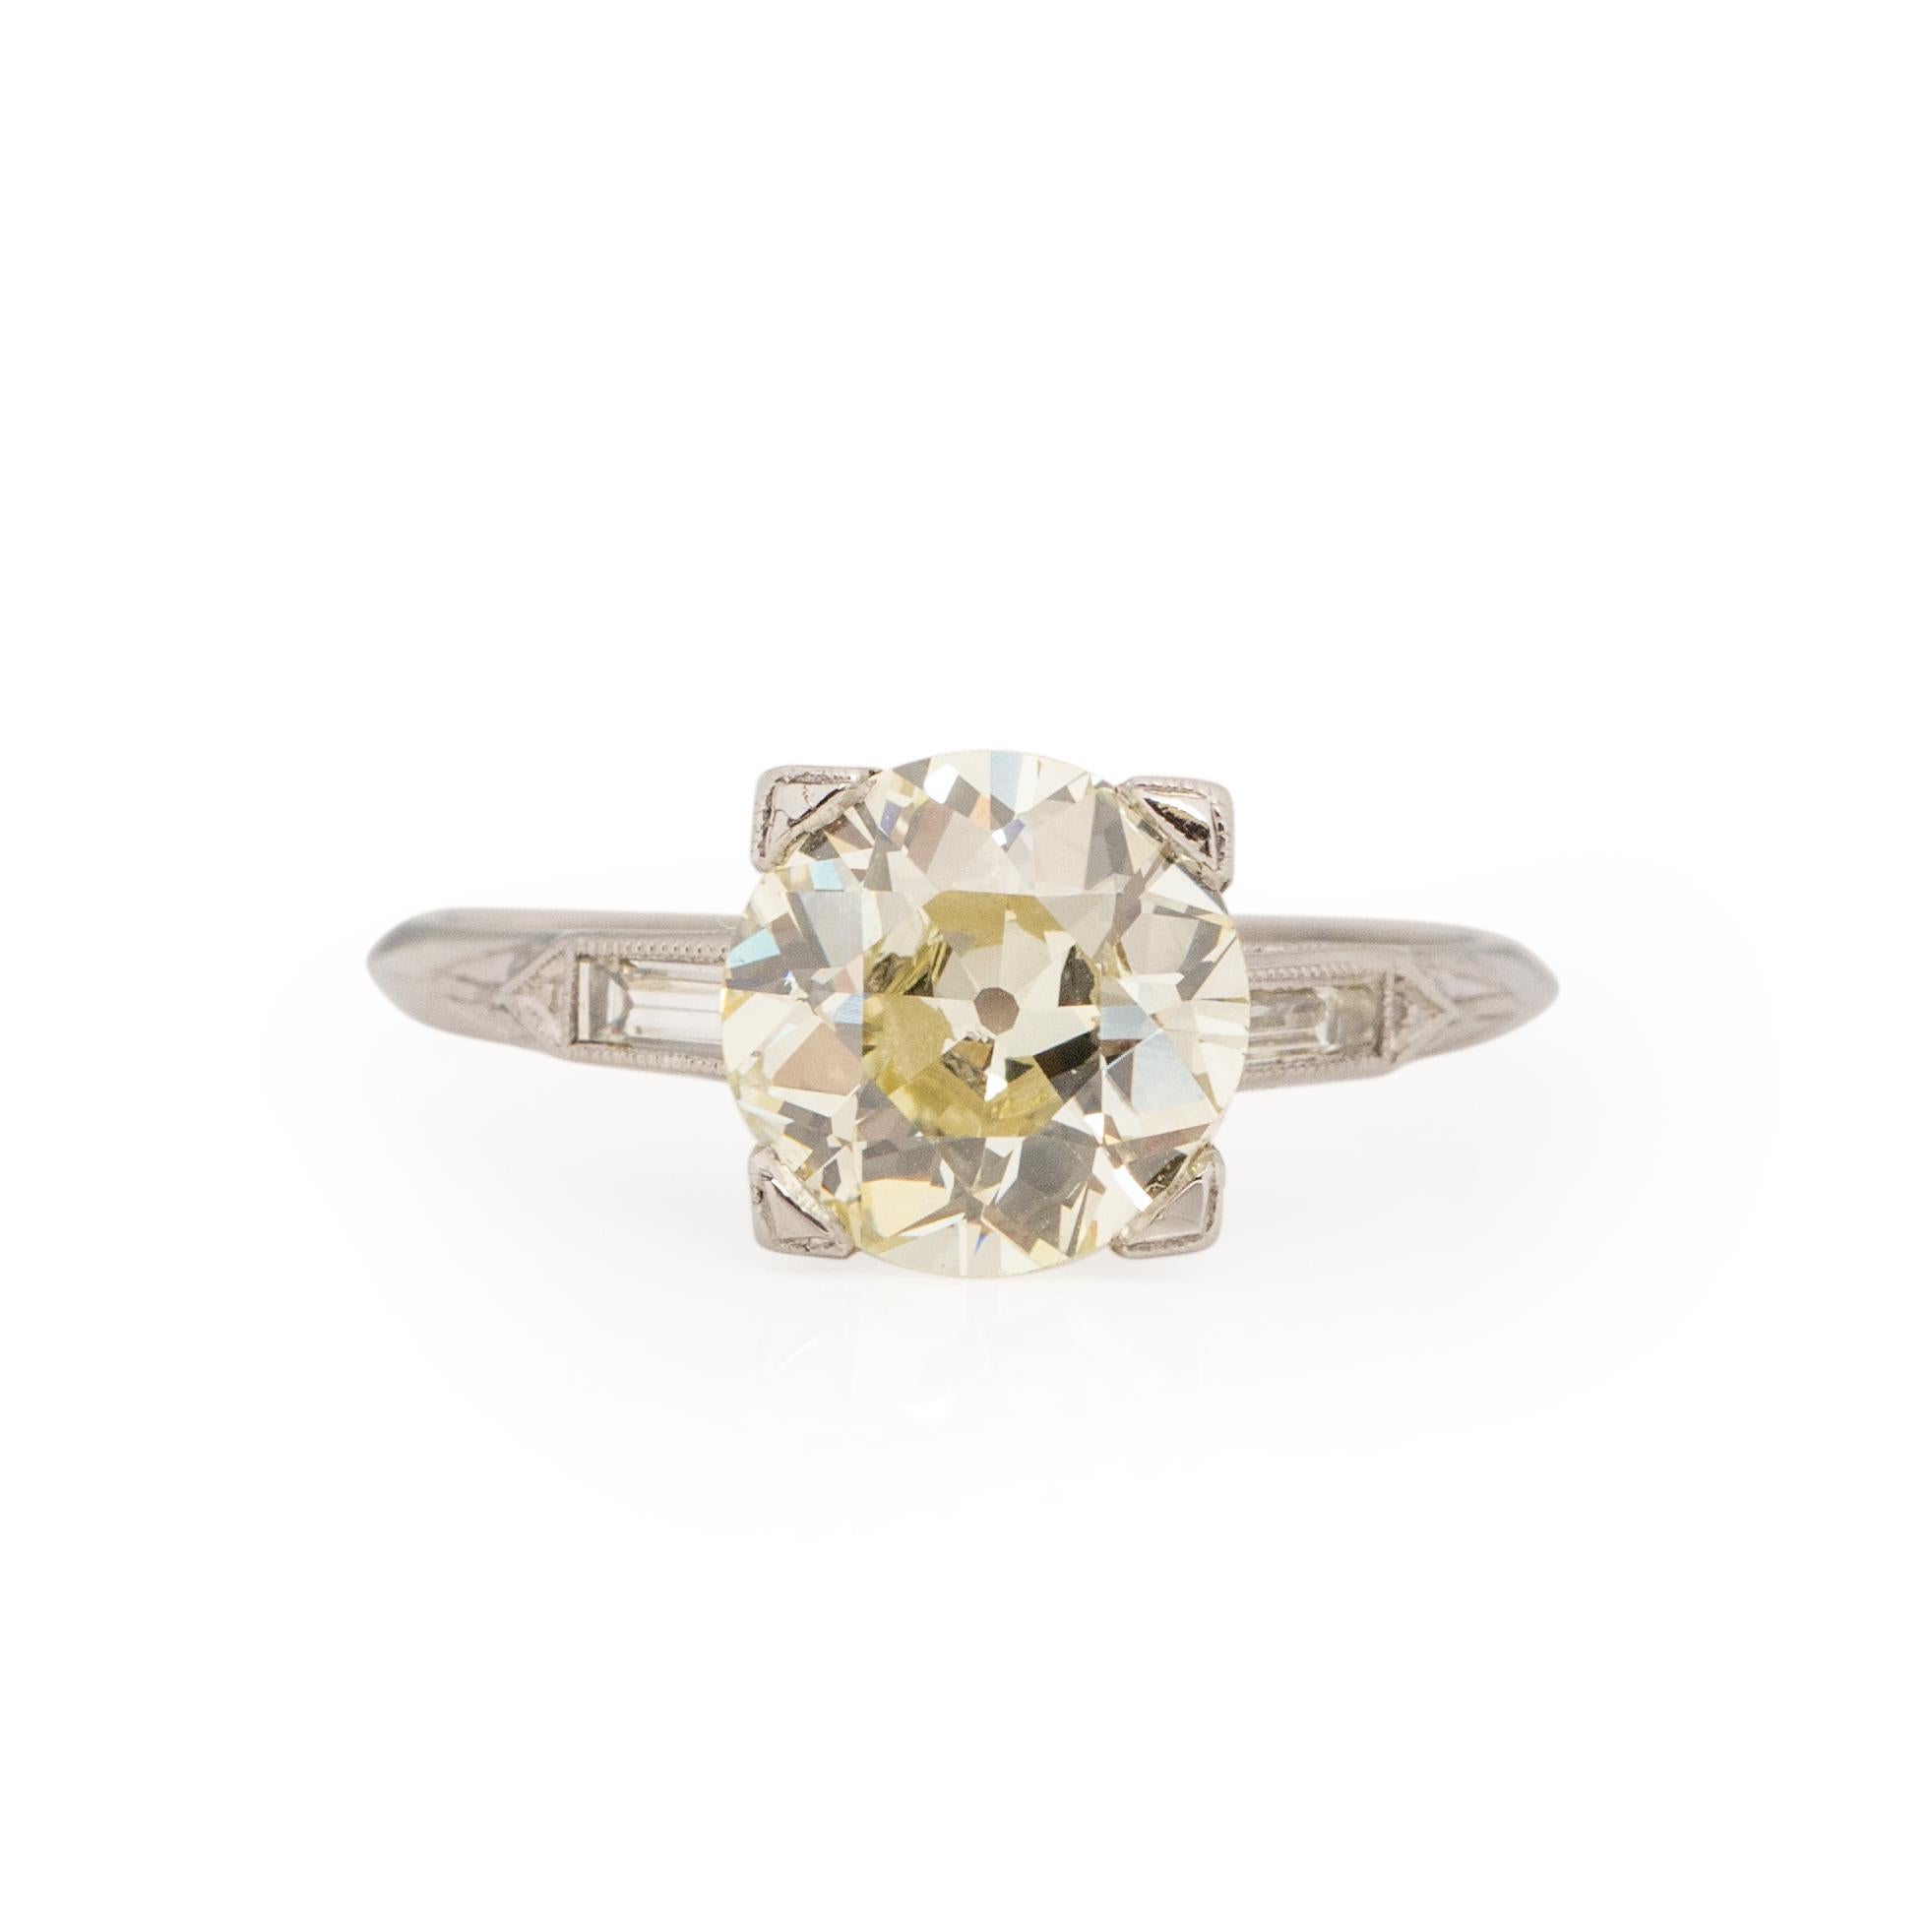 Here we have a bold and beautiful warm colored vintage solitaire engagement ring. This ring is crafted in platinum, the simple classic shank holds two perfectly cut baguette diamonds. Sitting on either side of a 2.52Ct old European cut warm colored